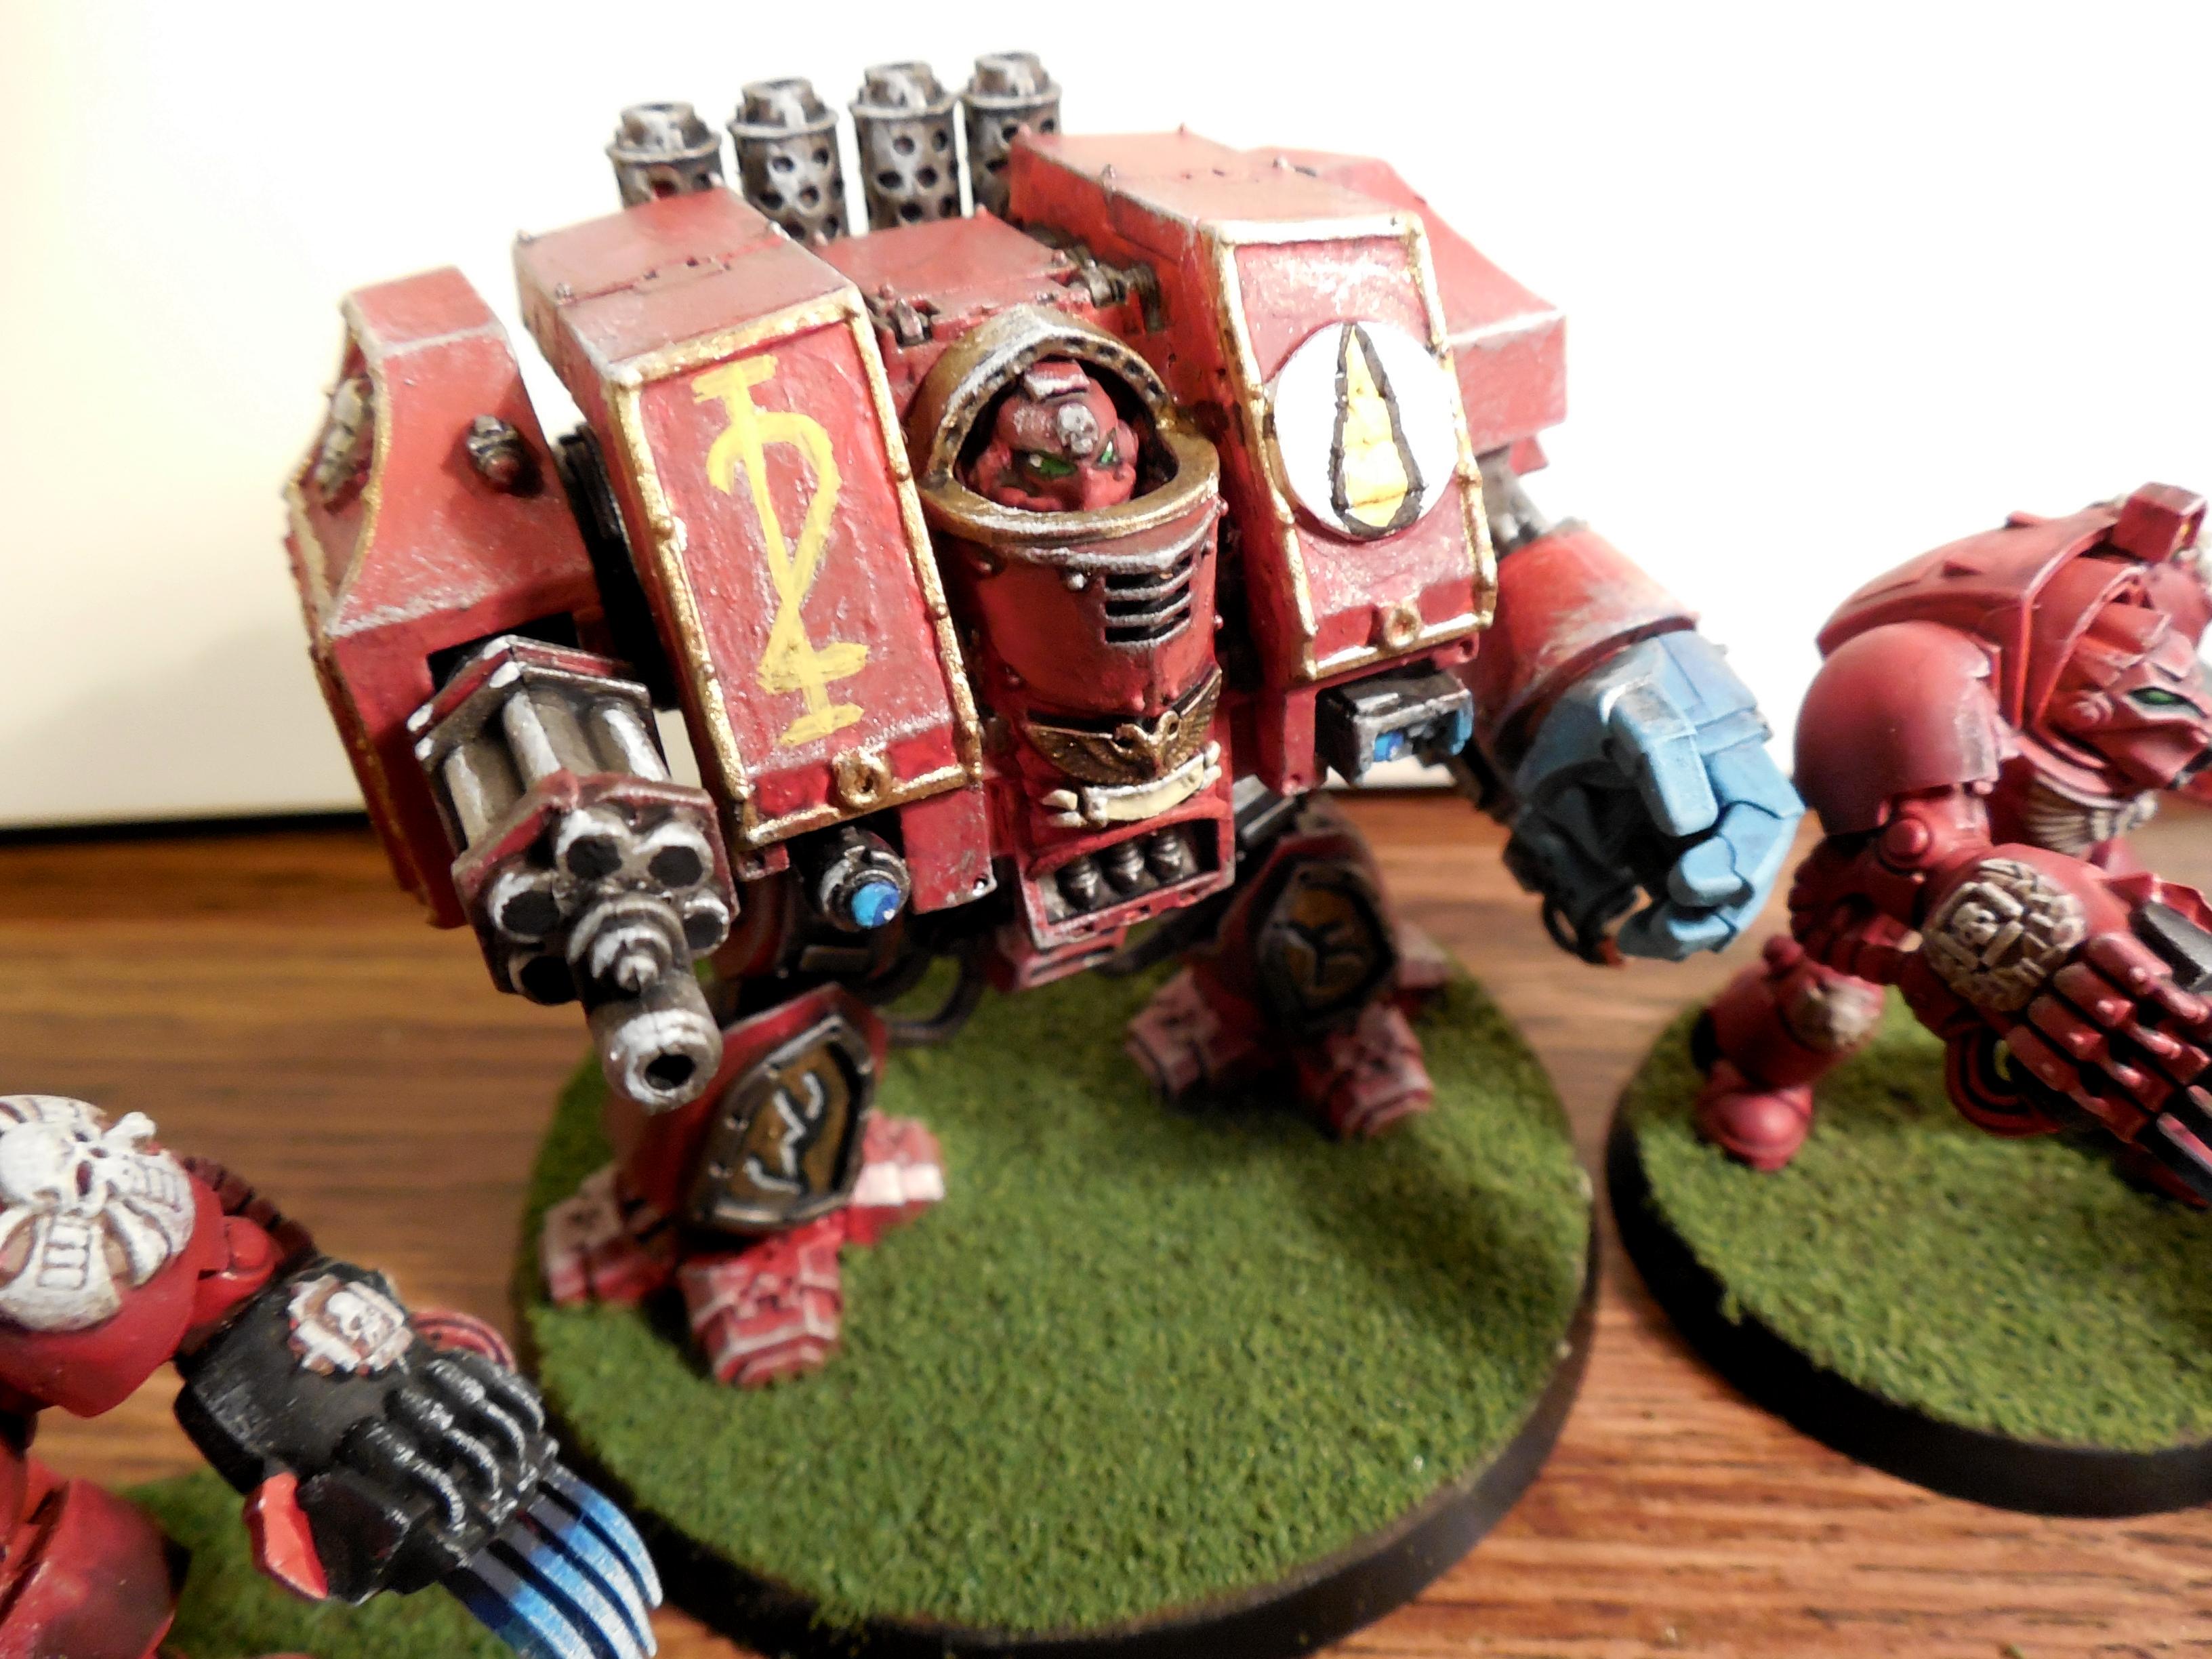 2nd Company Blood Angels, Blood Angel Dreadnaught, Blood Angels, Captain Aphiel, Daunte, Dreadnought, Land Raider, Mephiston, Scratch Built Land Raiders, Space Marines, Storm Raven, Terminator Squad, The Blooded